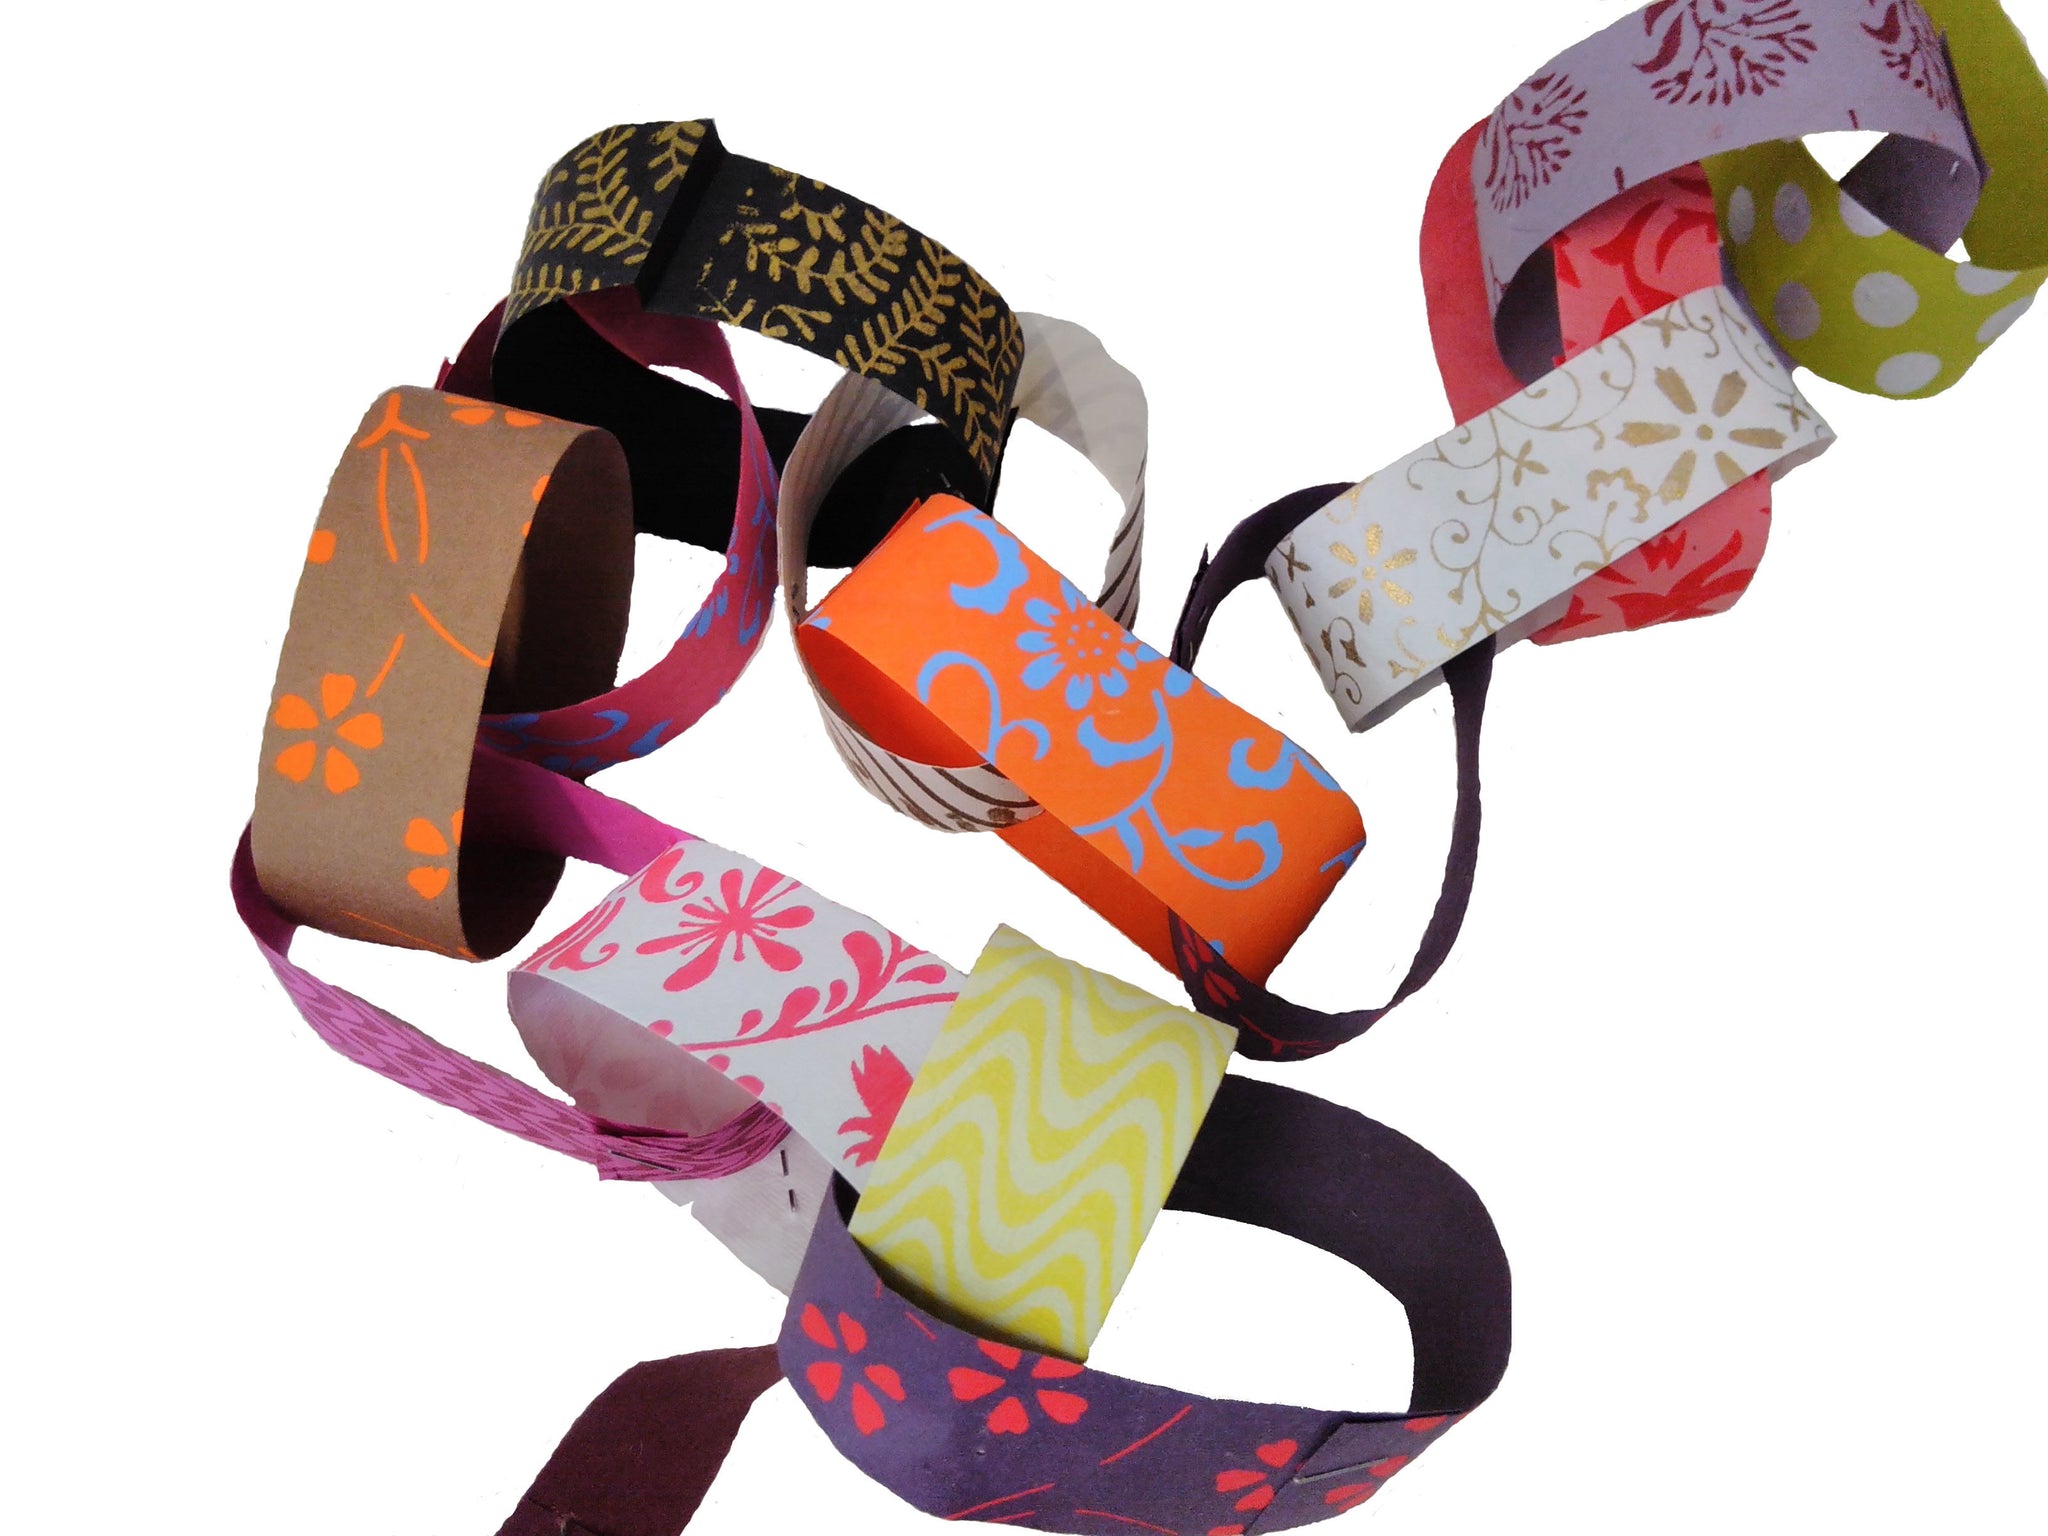 multicoloured and patterned paper chain on a white background